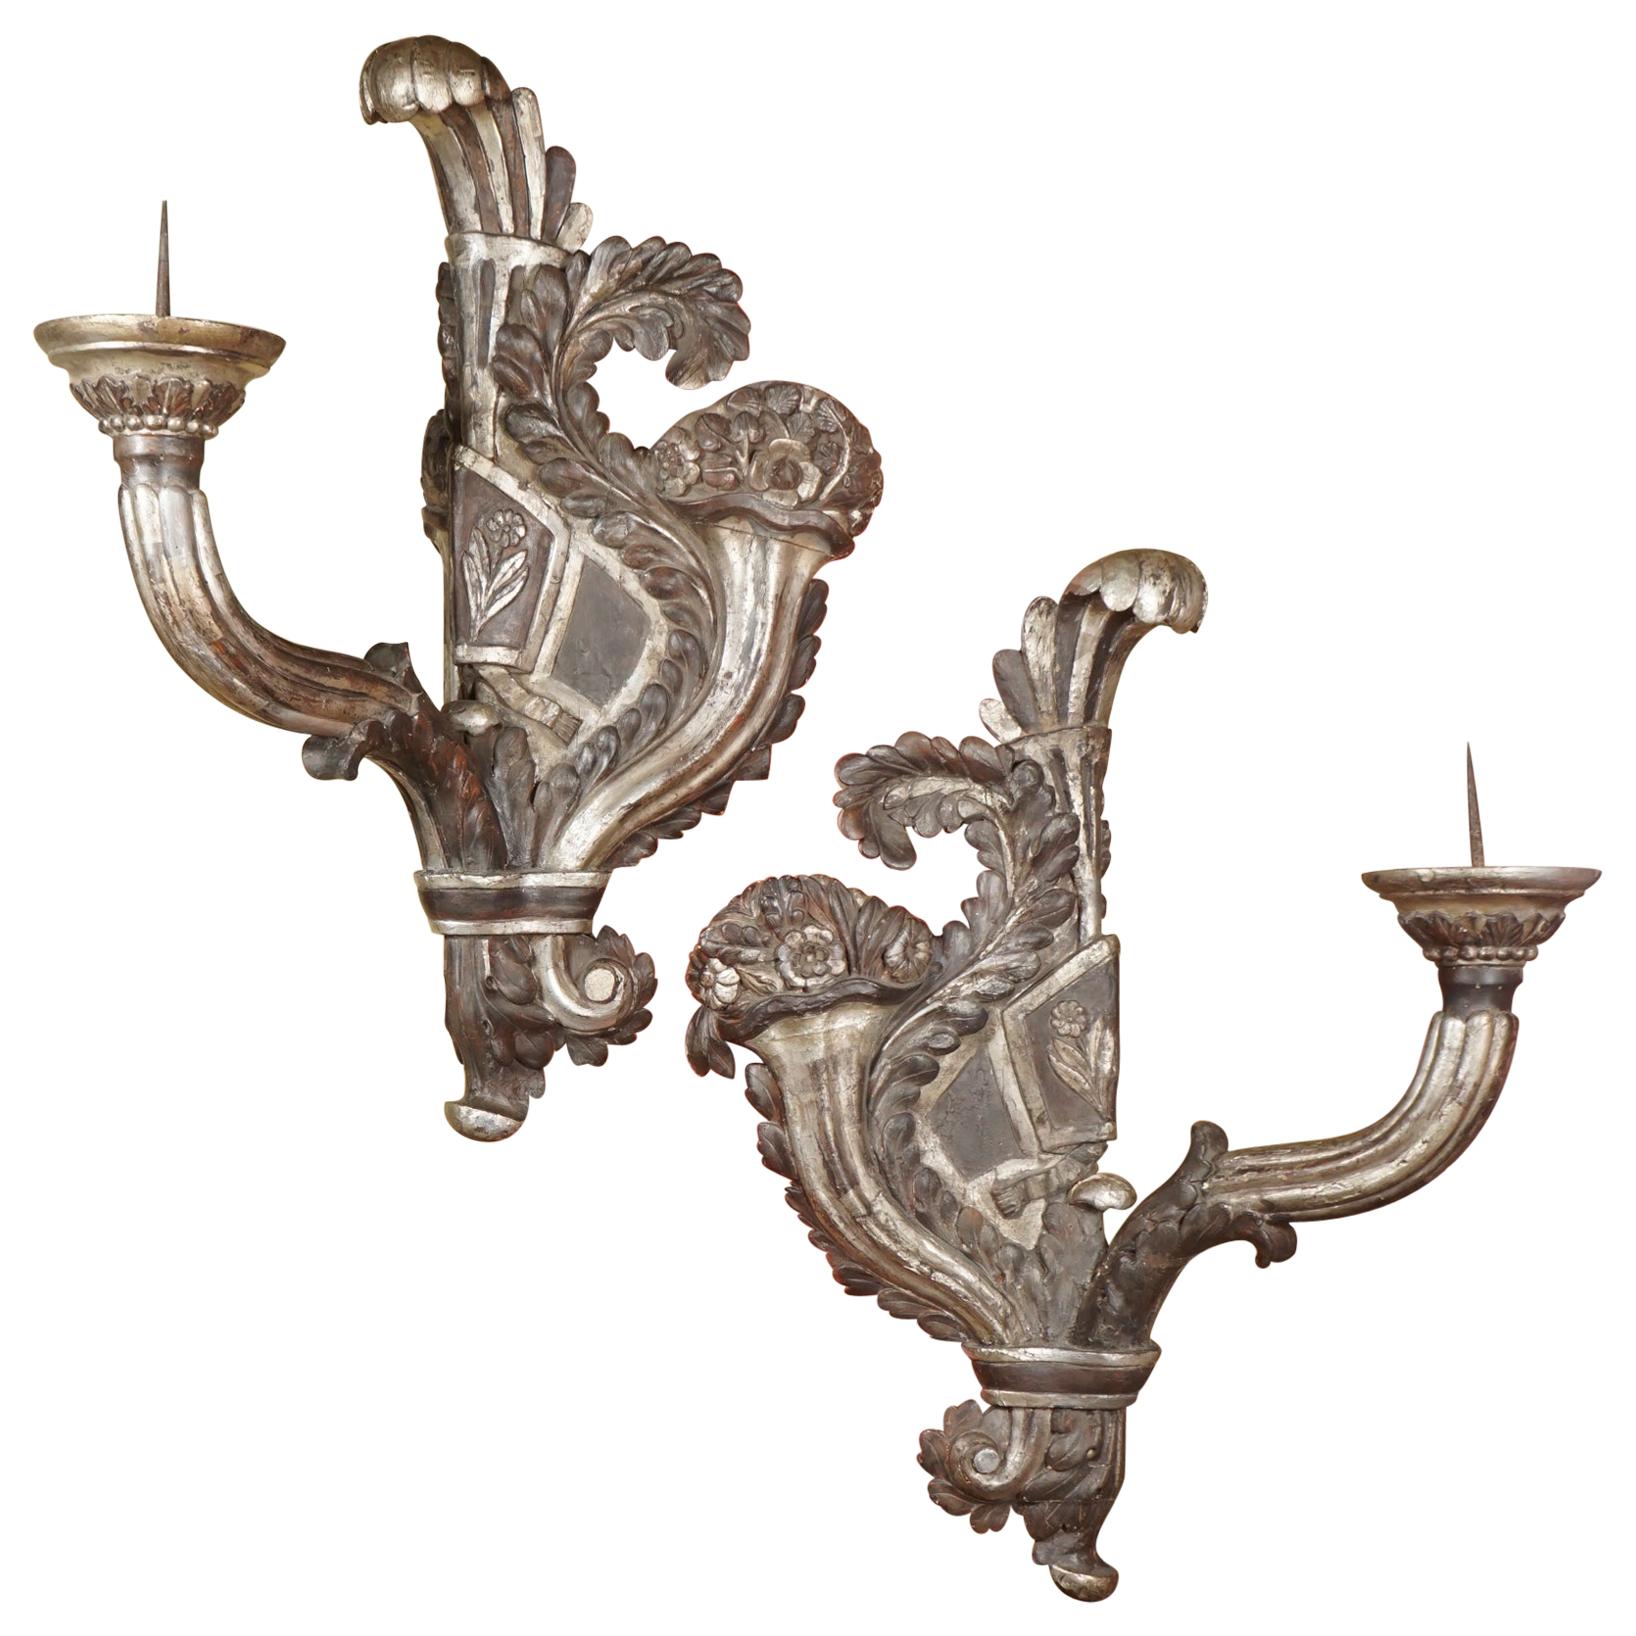 Pair of Very Large Period Baroque Carved Painted and Silver Gilt Pricket Sconces